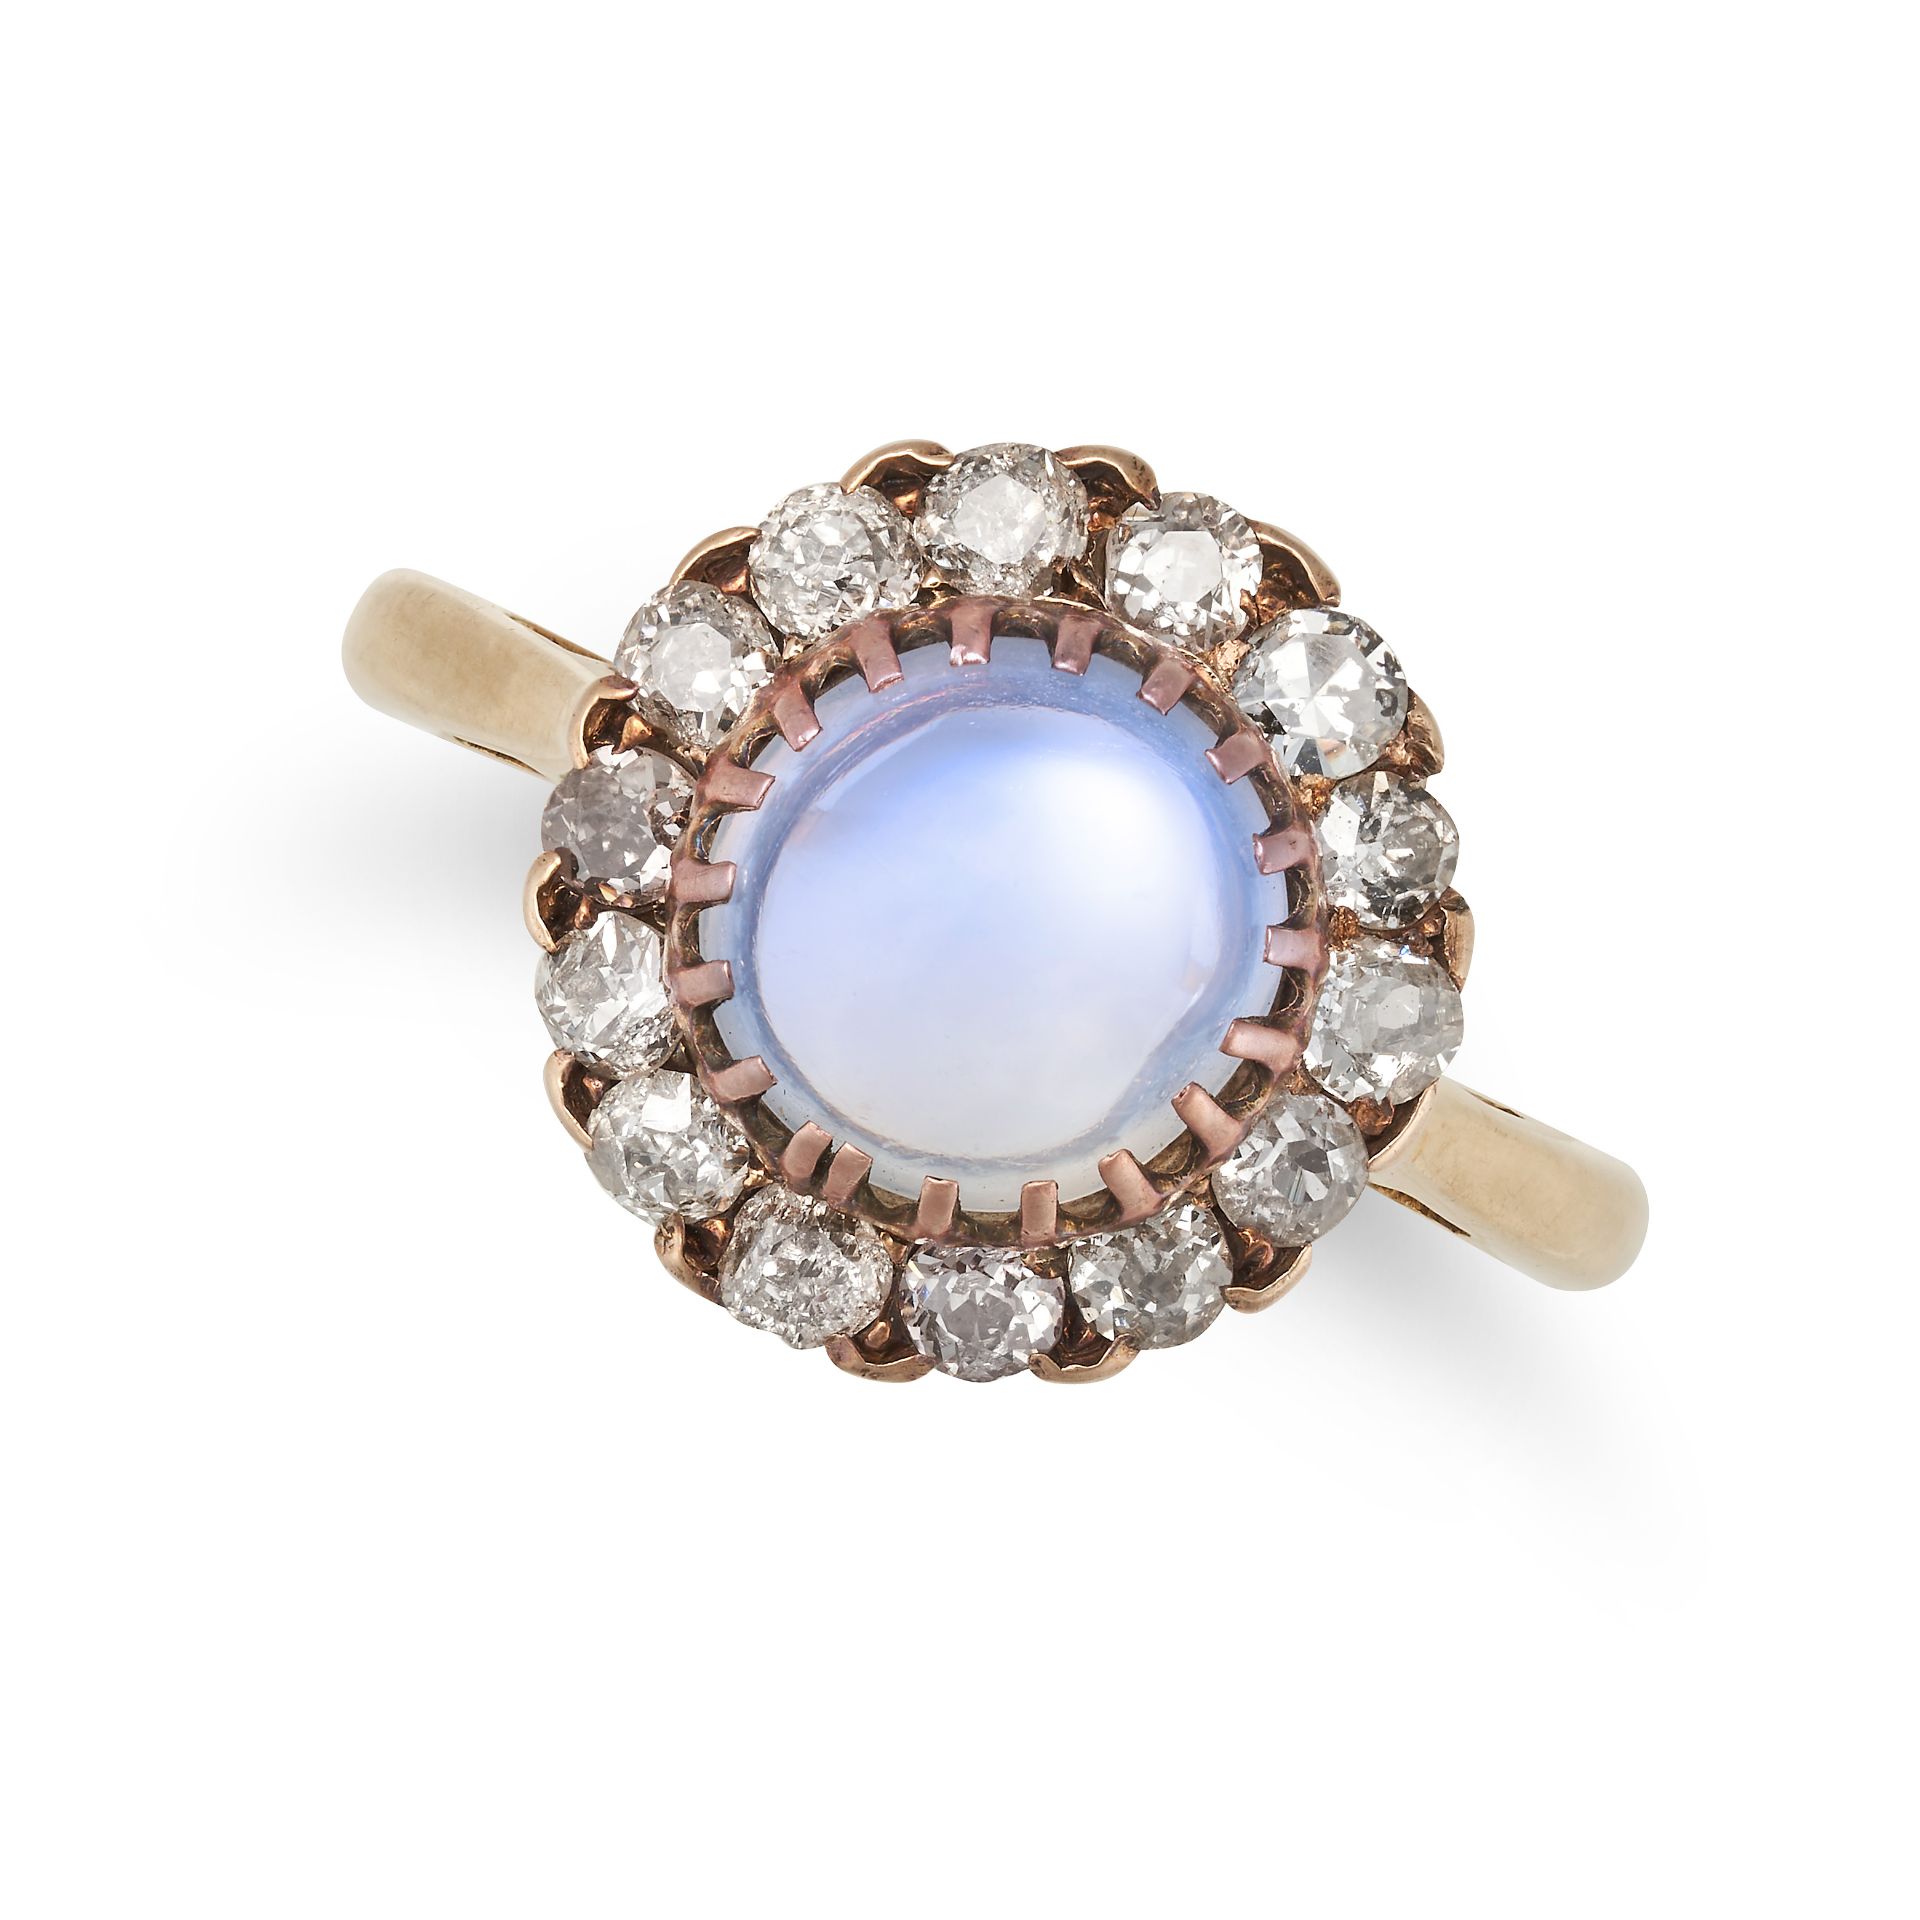 A MOONSTONE AND DIAMOND CLUSTER RING in yellow gold, set with a cabochon moonstone in a cluster o...